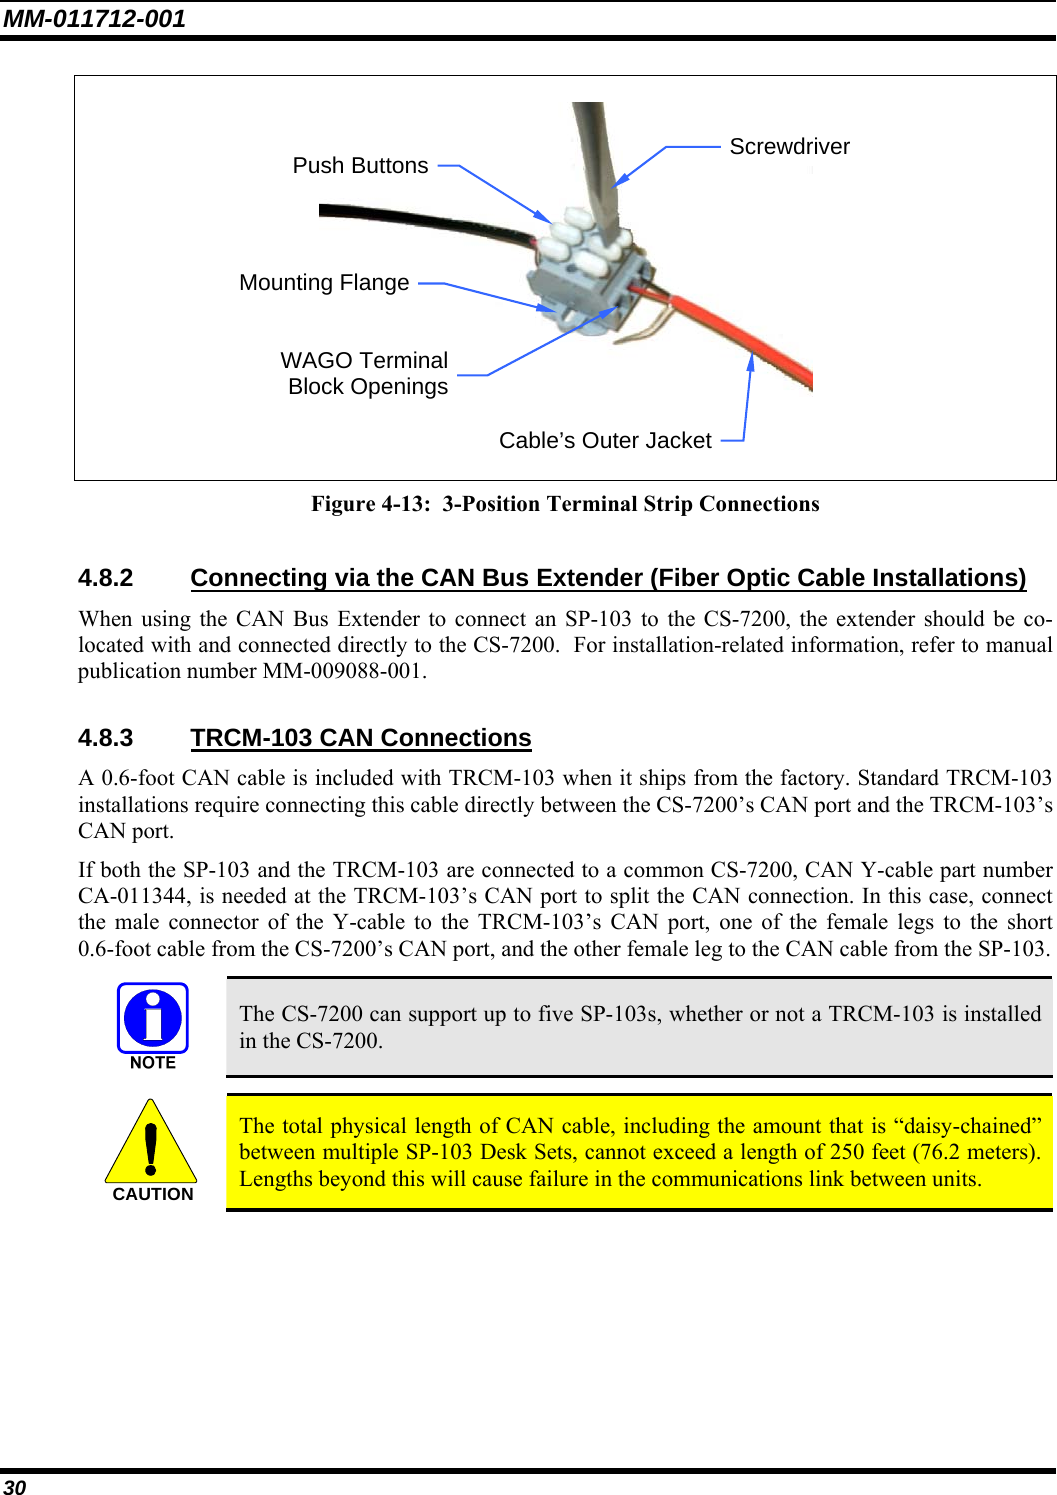 MM-011712-001 30  Figure 4-13:  3-Position Terminal Strip Connections  4.8.2  Connecting via the CAN Bus Extender (Fiber Optic Cable Installations) When using the CAN Bus Extender to connect an SP-103 to the CS-7200, the extender should be co-located with and connected directly to the CS-7200.  For installation-related information, refer to manual publication number MM-009088-001.  4.8.3  TRCM-103 CAN Connections A 0.6-foot CAN cable is included with TRCM-103 when it ships from the factory. Standard TRCM-103 installations require connecting this cable directly between the CS-7200’s CAN port and the TRCM-103’s CAN port. If both the SP-103 and the TRCM-103 are connected to a common CS-7200, CAN Y-cable part number CA-011344, is needed at the TRCM-103’s CAN port to split the CAN connection. In this case, connect the male connector of the Y-cable to the TRCM-103’s CAN port, one of the female legs to the short 0.6-foot cable from the CS-7200’s CAN port, and the other female leg to the CAN cable from the SP-103.   The CS-7200 can support up to five SP-103s, whether or not a TRCM-103 is installed in the CS-7200.  CAUTION  The total physical length of CAN cable, including the amount that is “daisy-chained” between multiple SP-103 Desk Sets, cannot exceed a length of 250 feet (76.2 meters). Lengths beyond this will cause failure in the communications link between units. WAGO TerminalBlock OpeningsCable’s Outer JacketPush Buttons Mounting FlangeScrewdriver 